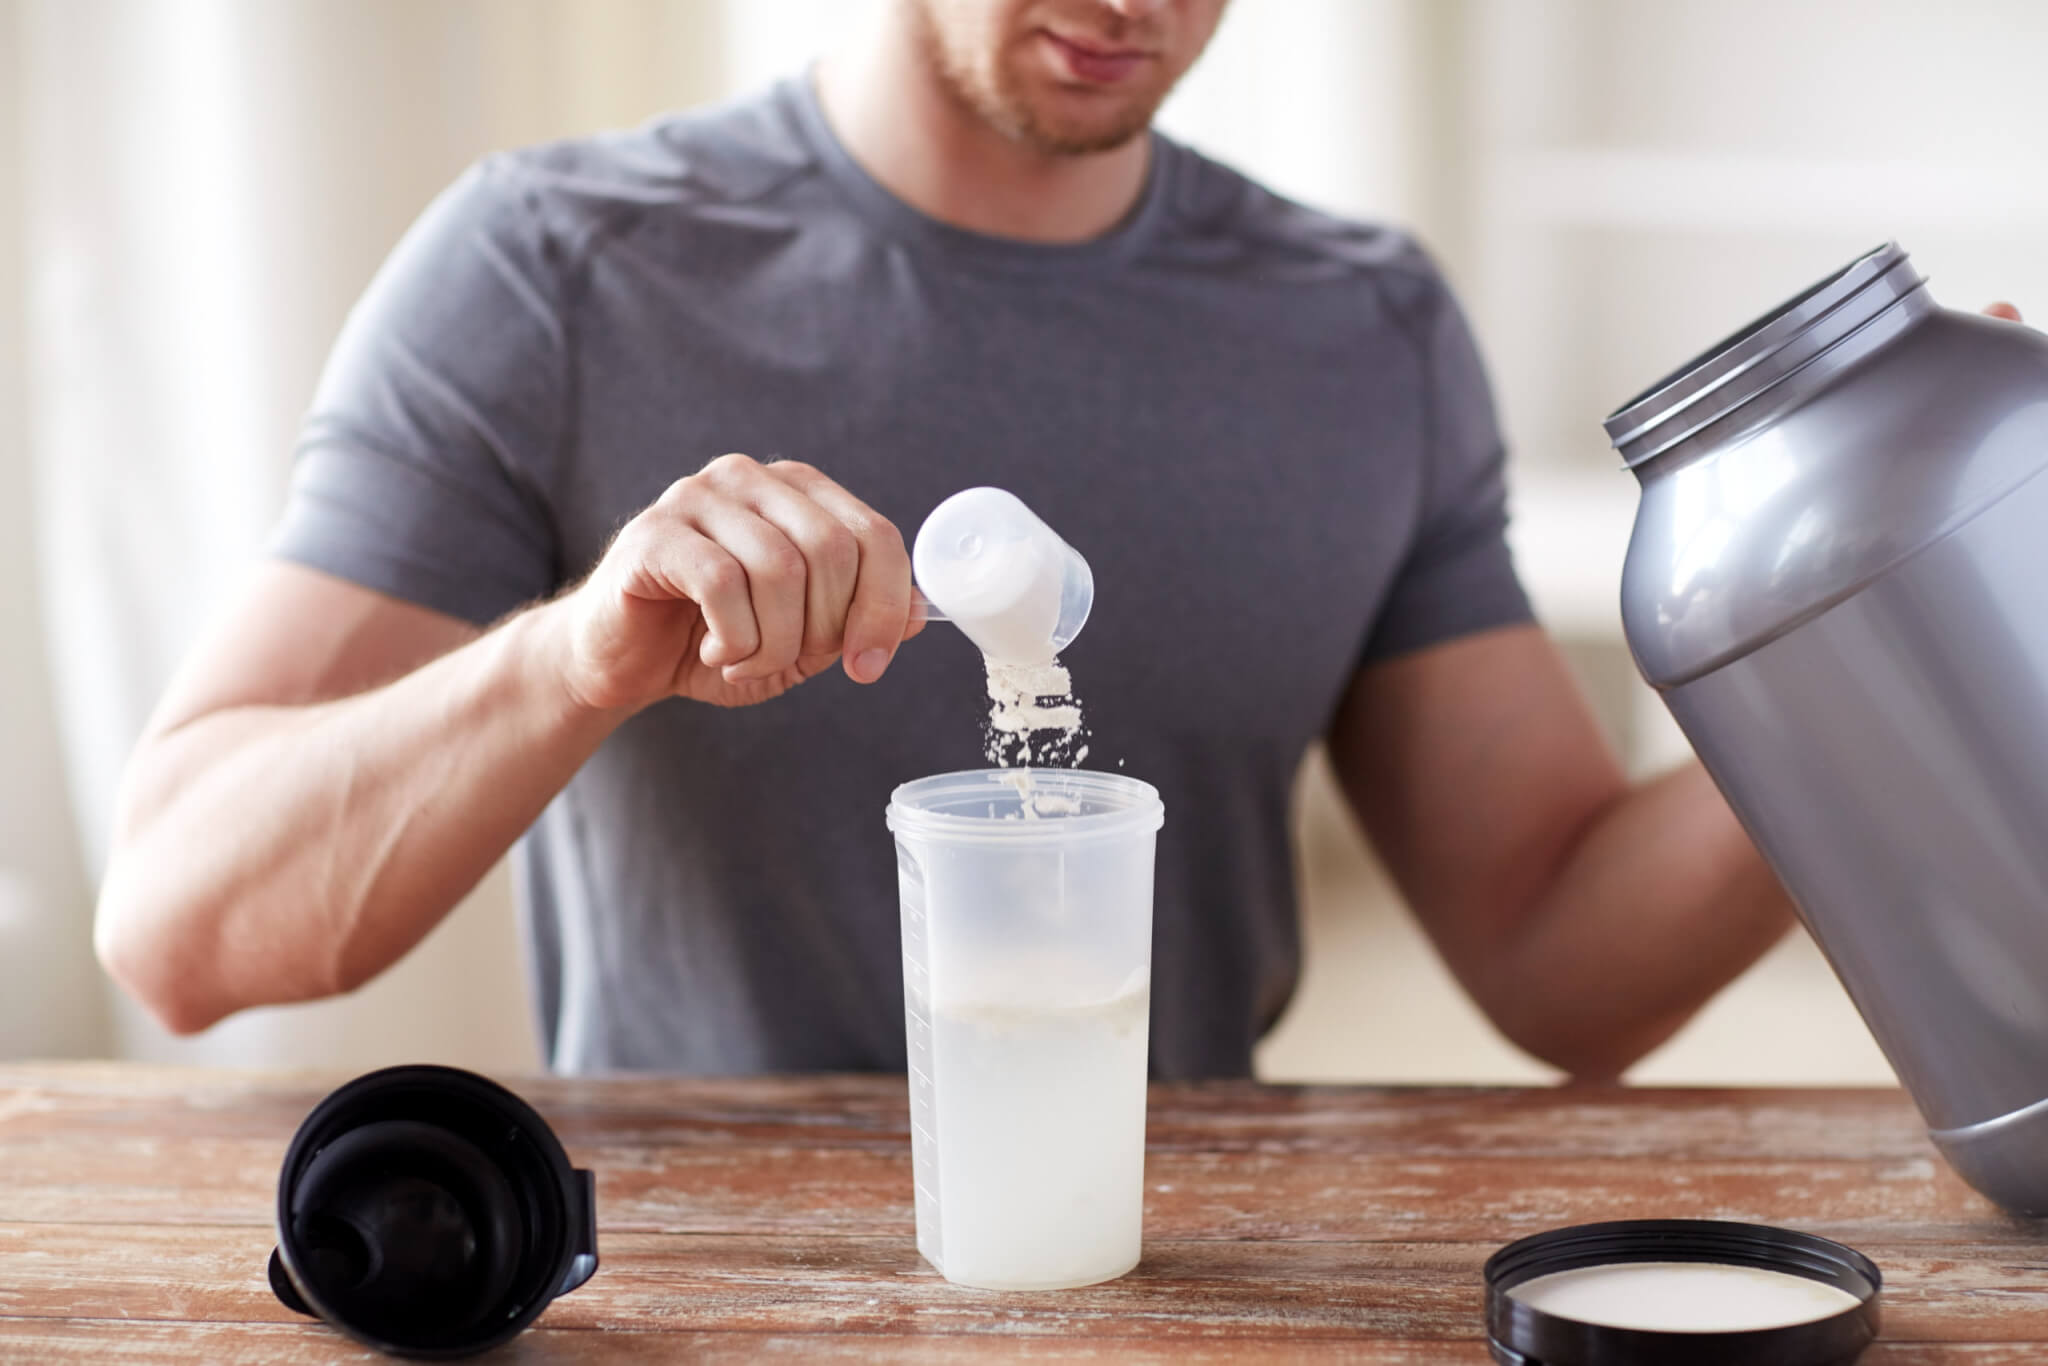 High-protein diets may decrease testosterone levels in men, leading to ED, fertility struggles - Study Finds